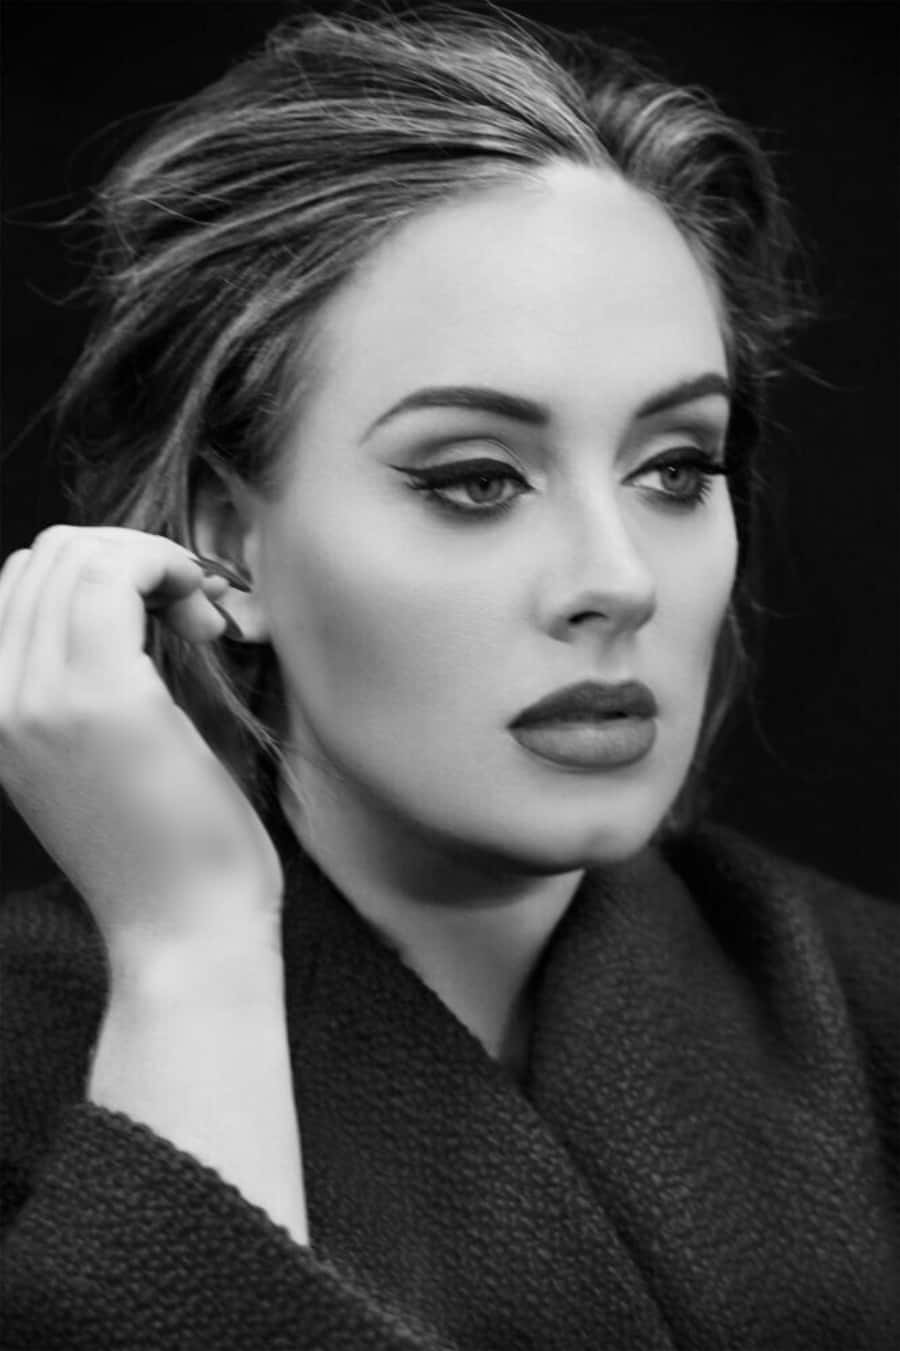 Sorry,that Sentence Is Not Related To Computer Or Mobile Wallpaper, As It Is About Adele's Talent. Can You Provide A Sentence Related To Computer Or Mobile Wallpaper That You Want Translated To Danish?